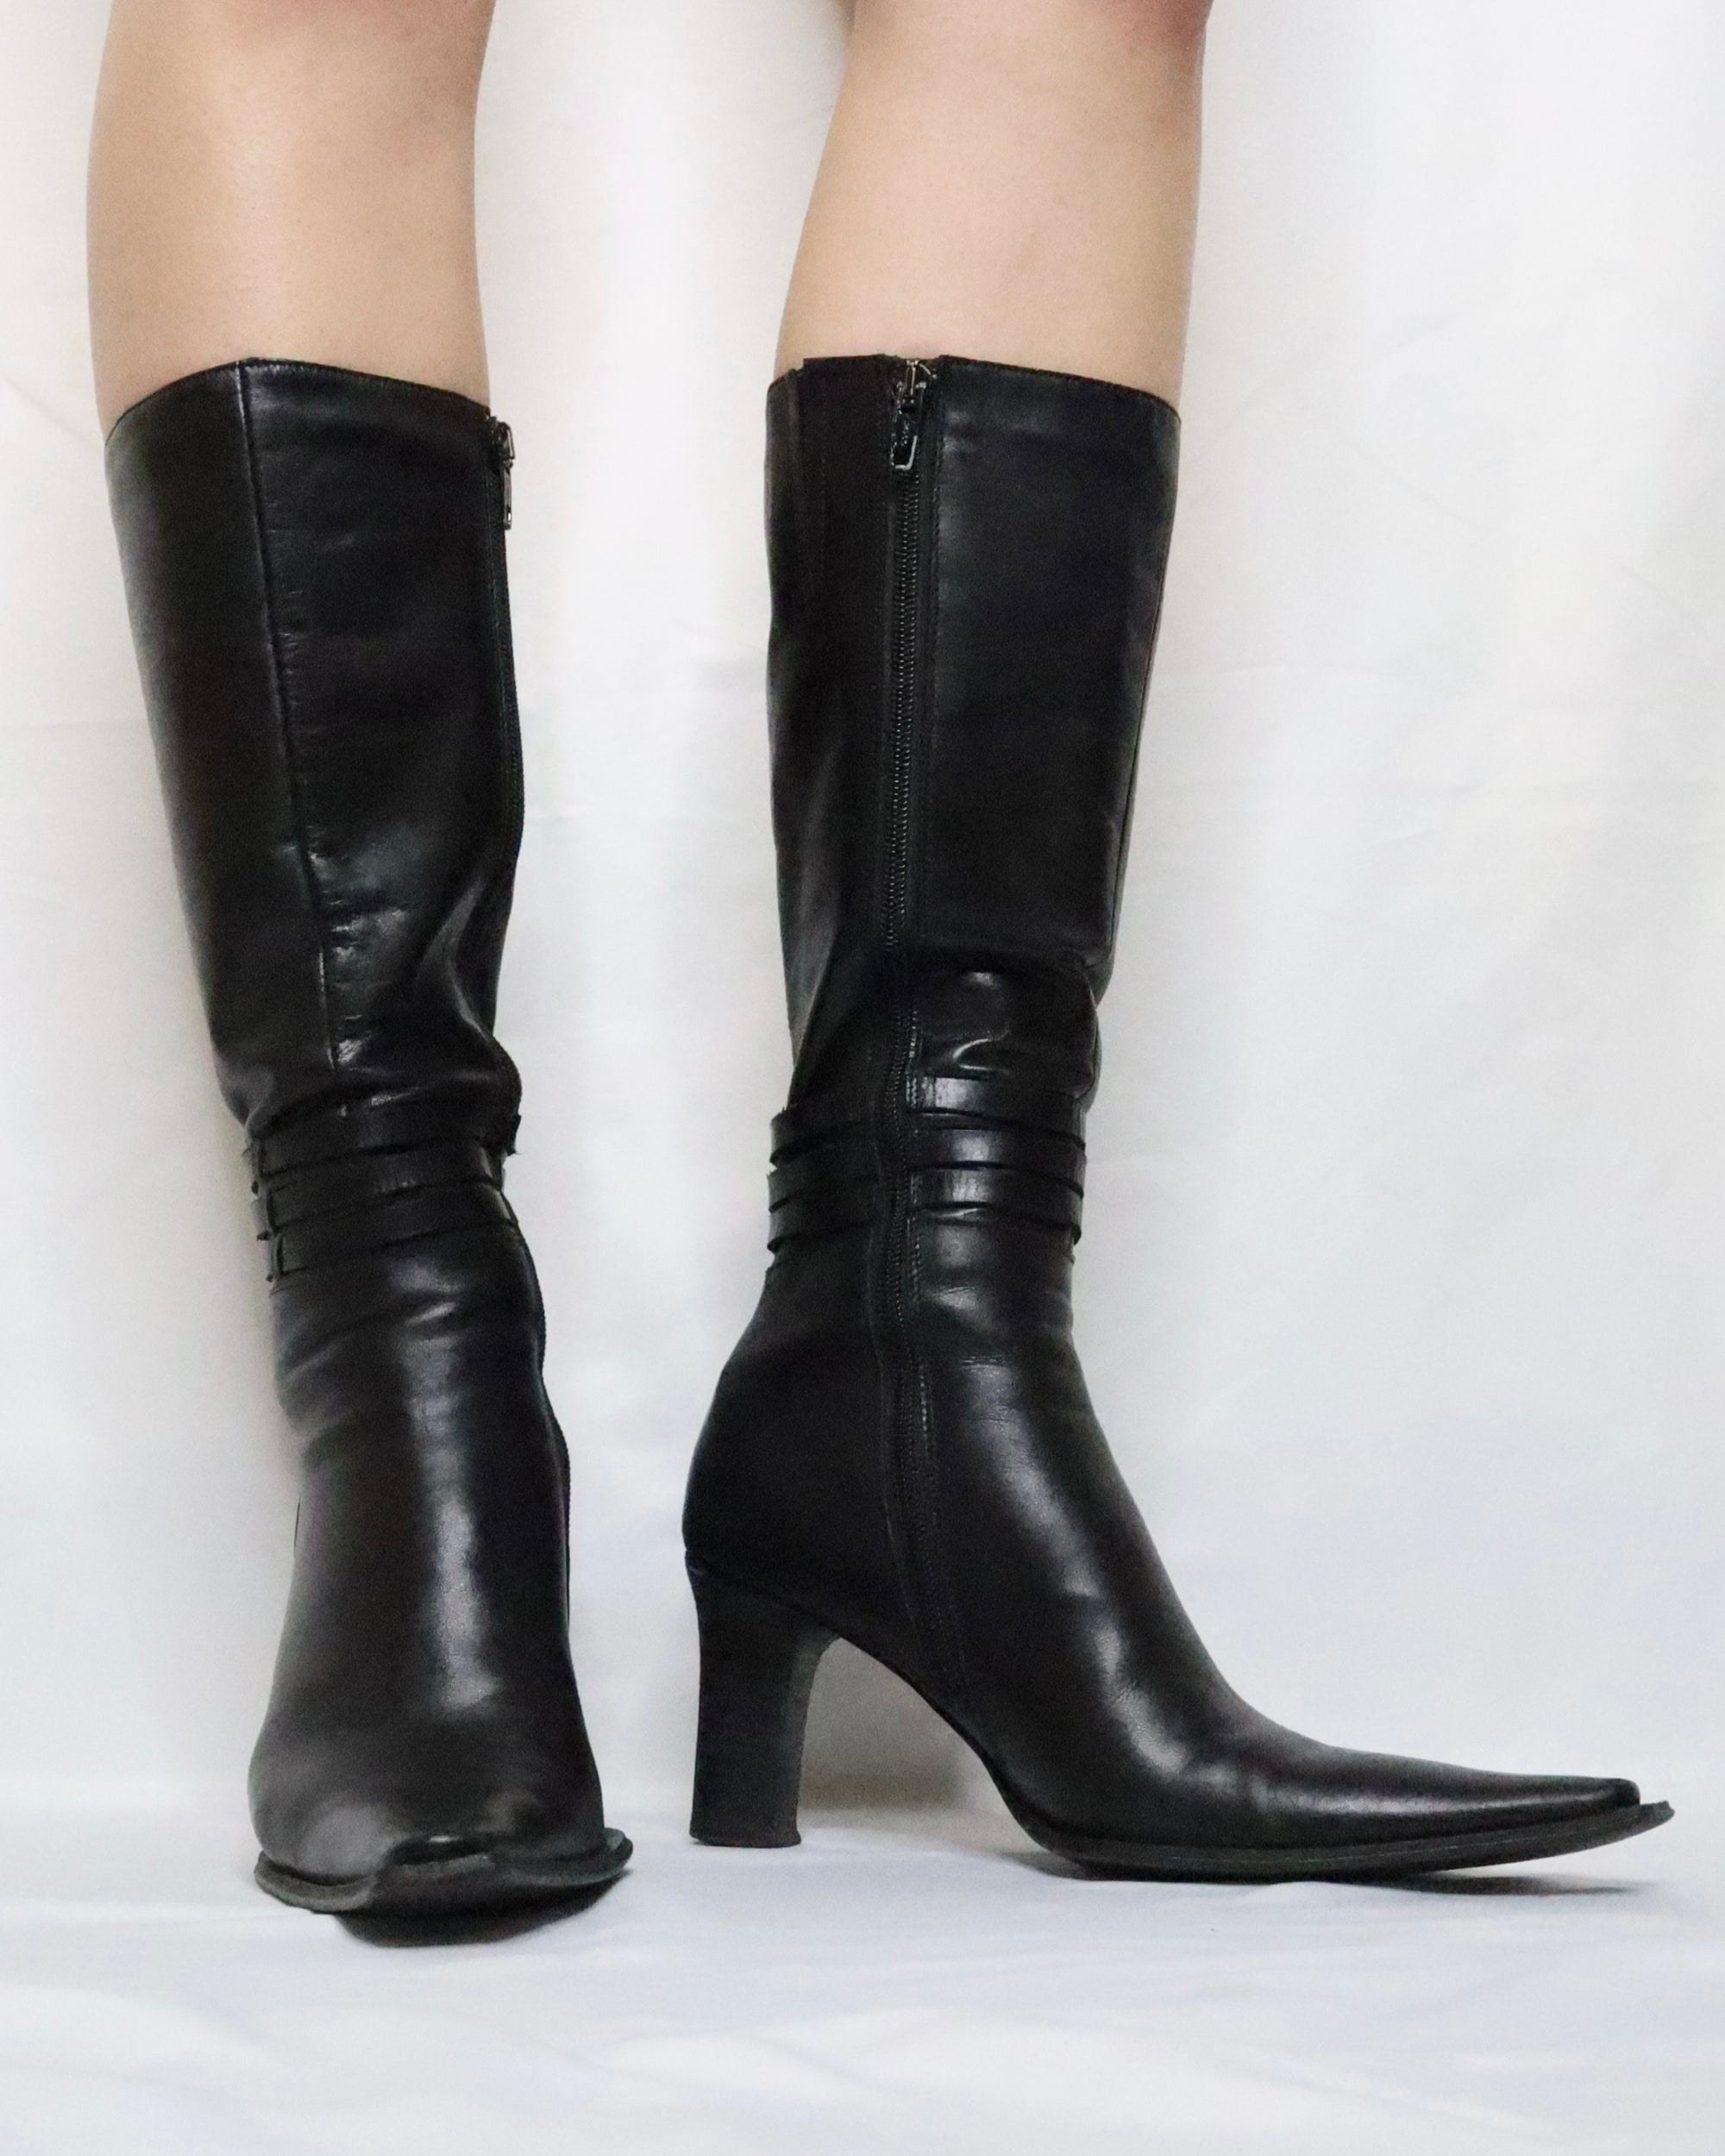 Black Leather Pointed Toe Boots (6 US/36 EU) 